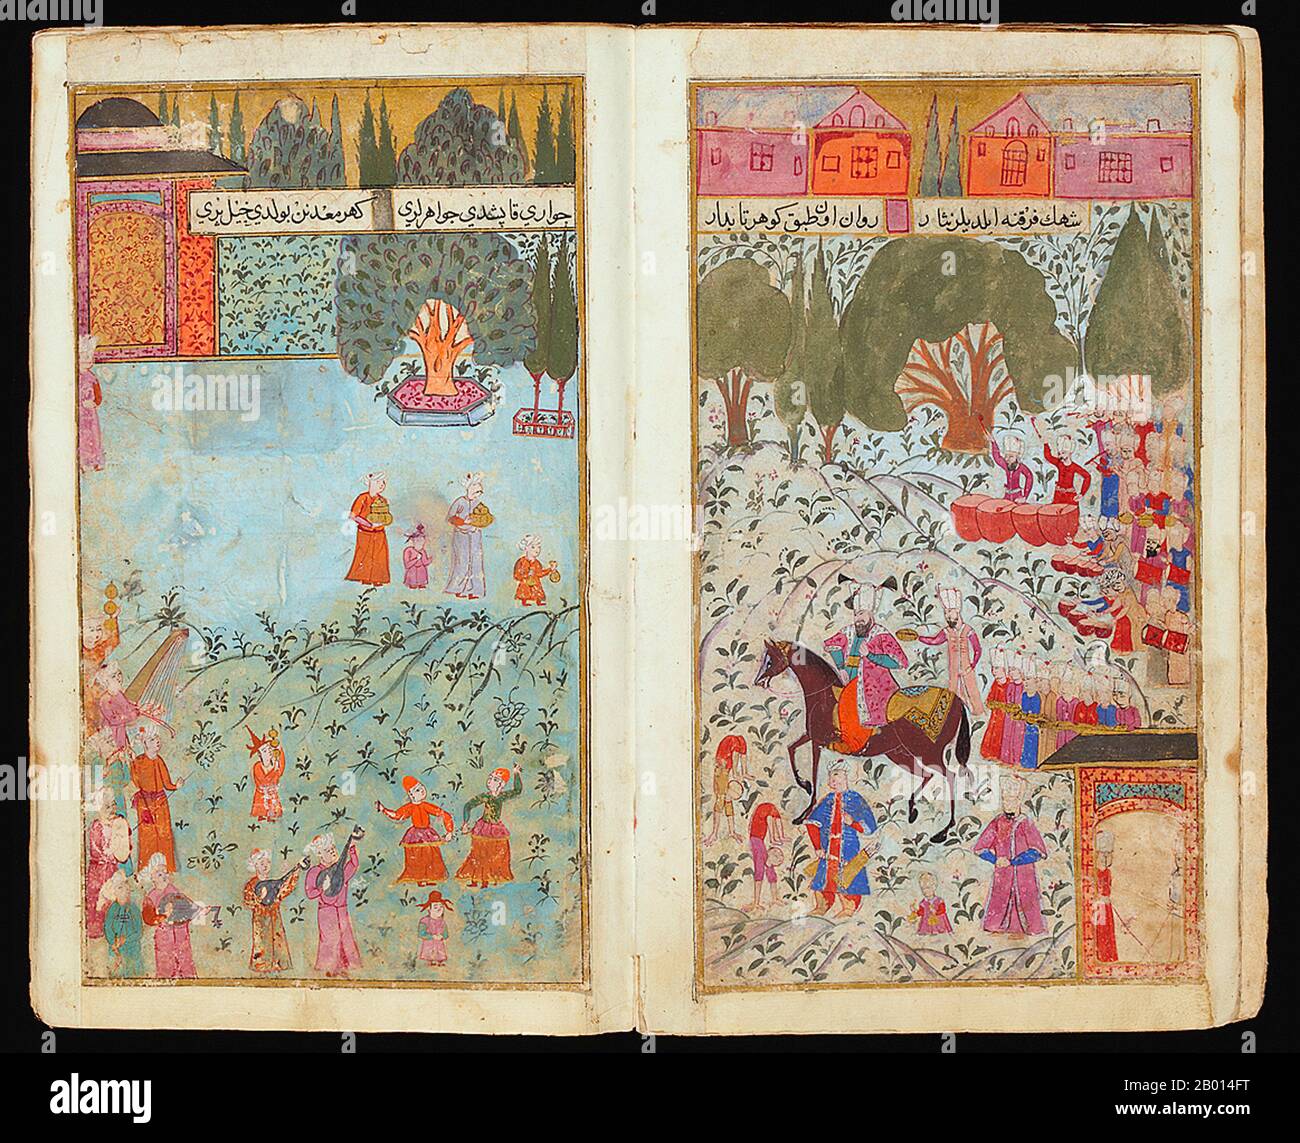 Turkey: 'Mehmed III arriving at the head of the victorious army at Davudpasha, a Suburb of Istanbul'. Miniature paintings from an illustrated manuscript depicting the 1596 military campaign in Hungary by Ottoman Sultan Mehmed III, c. 1600.  Mehmed III Adli (May 26, 1566 – December 21/22, 1603) was sultan of the Ottoman Empire from 1595-1603. He remains notorious for having nineteen of his brothers and half brothers murdered to secure power. He also killed over twenty of his sisters. They were all strangled by deaf-mutes. Mehmed III was an idle ruler, leaving government to his mother Safiye. Stock Photo